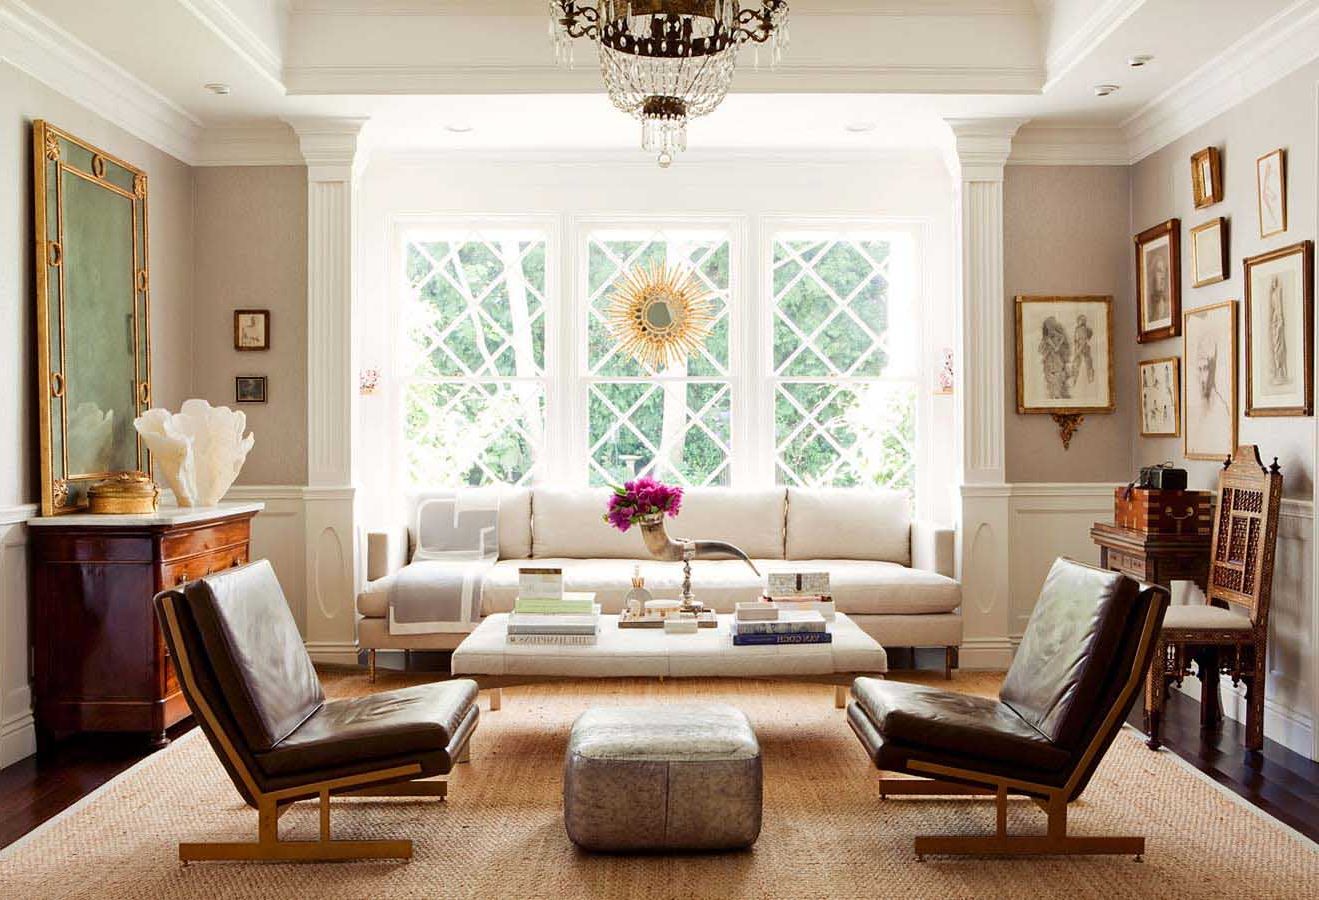 Feng Shui Decorated Magnificent Feng Shui Living Room Decorated With Fascinating Contemporary Design Using White Fabric Sofa And Black Leather Upholstered Chair Living Room Feng Shui Living Room For Family Quality Living